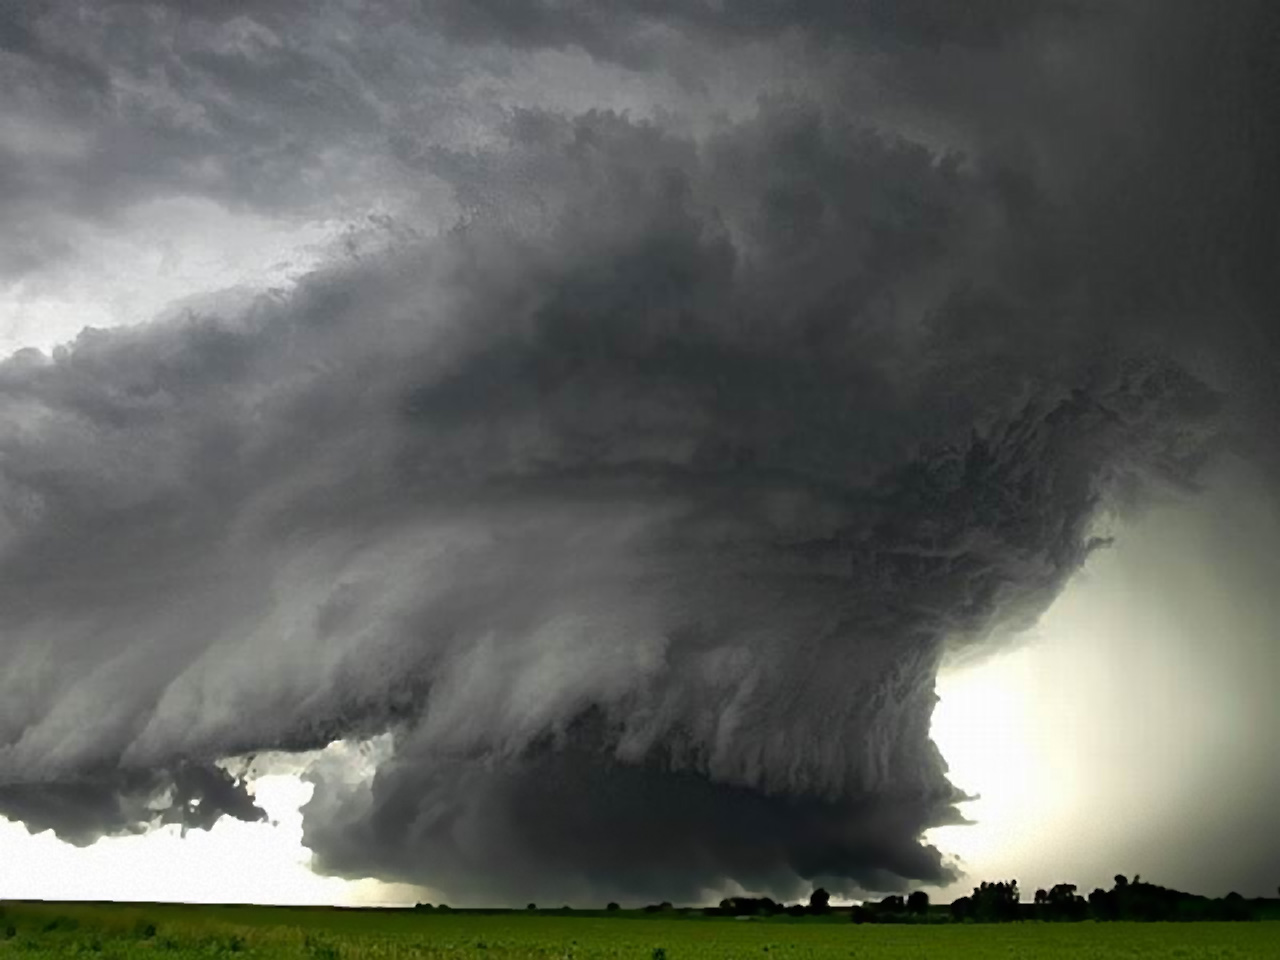 Low Wall Cloud   Weather Wallpaper Image featuring Tornadoes 1280x960